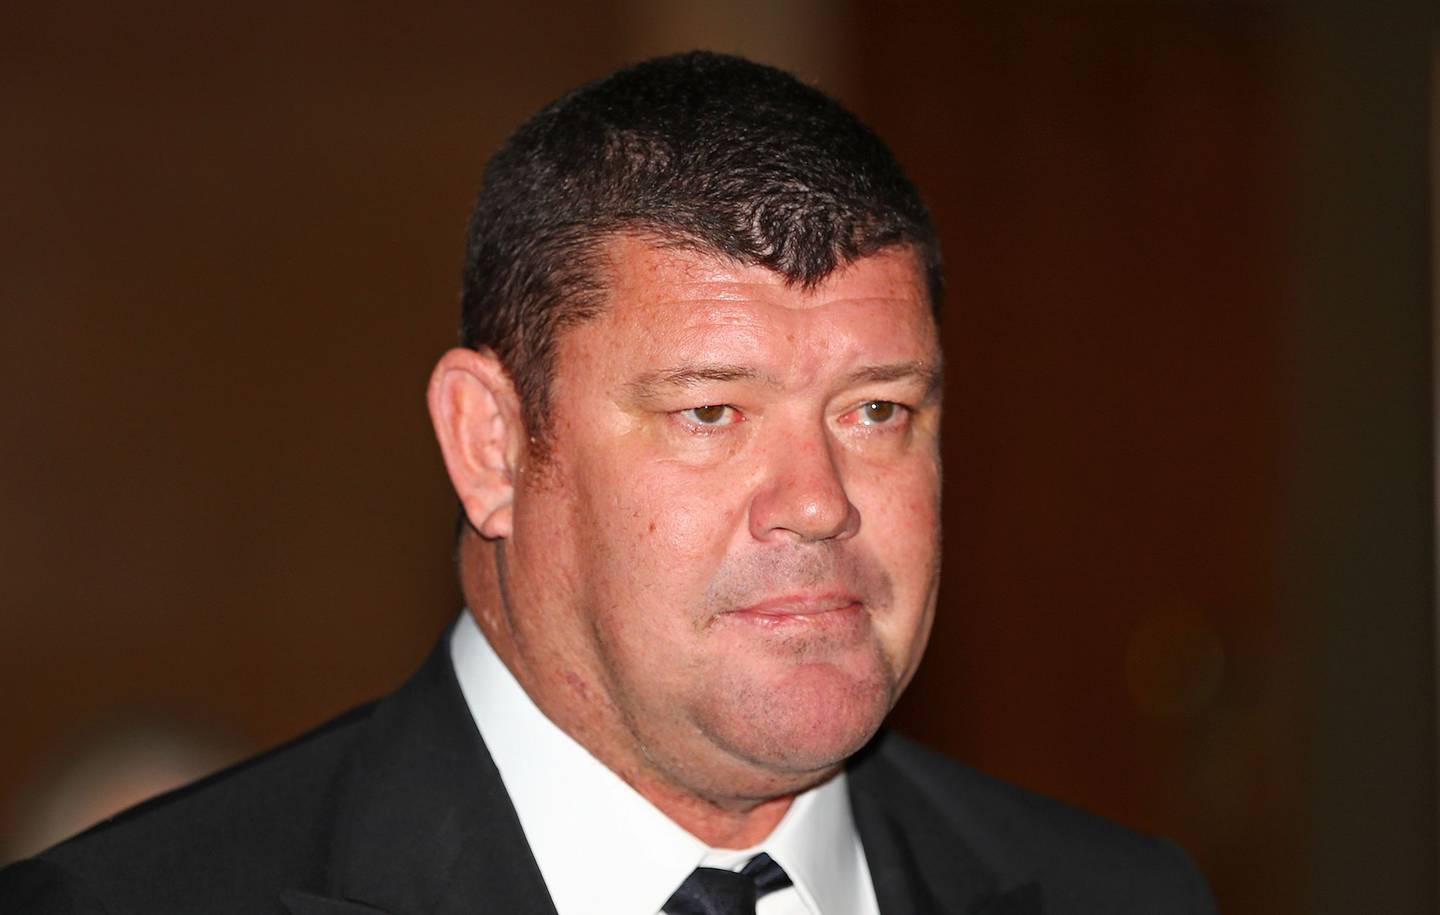 James Packer Photographer: Scott Barbour/Getty Images